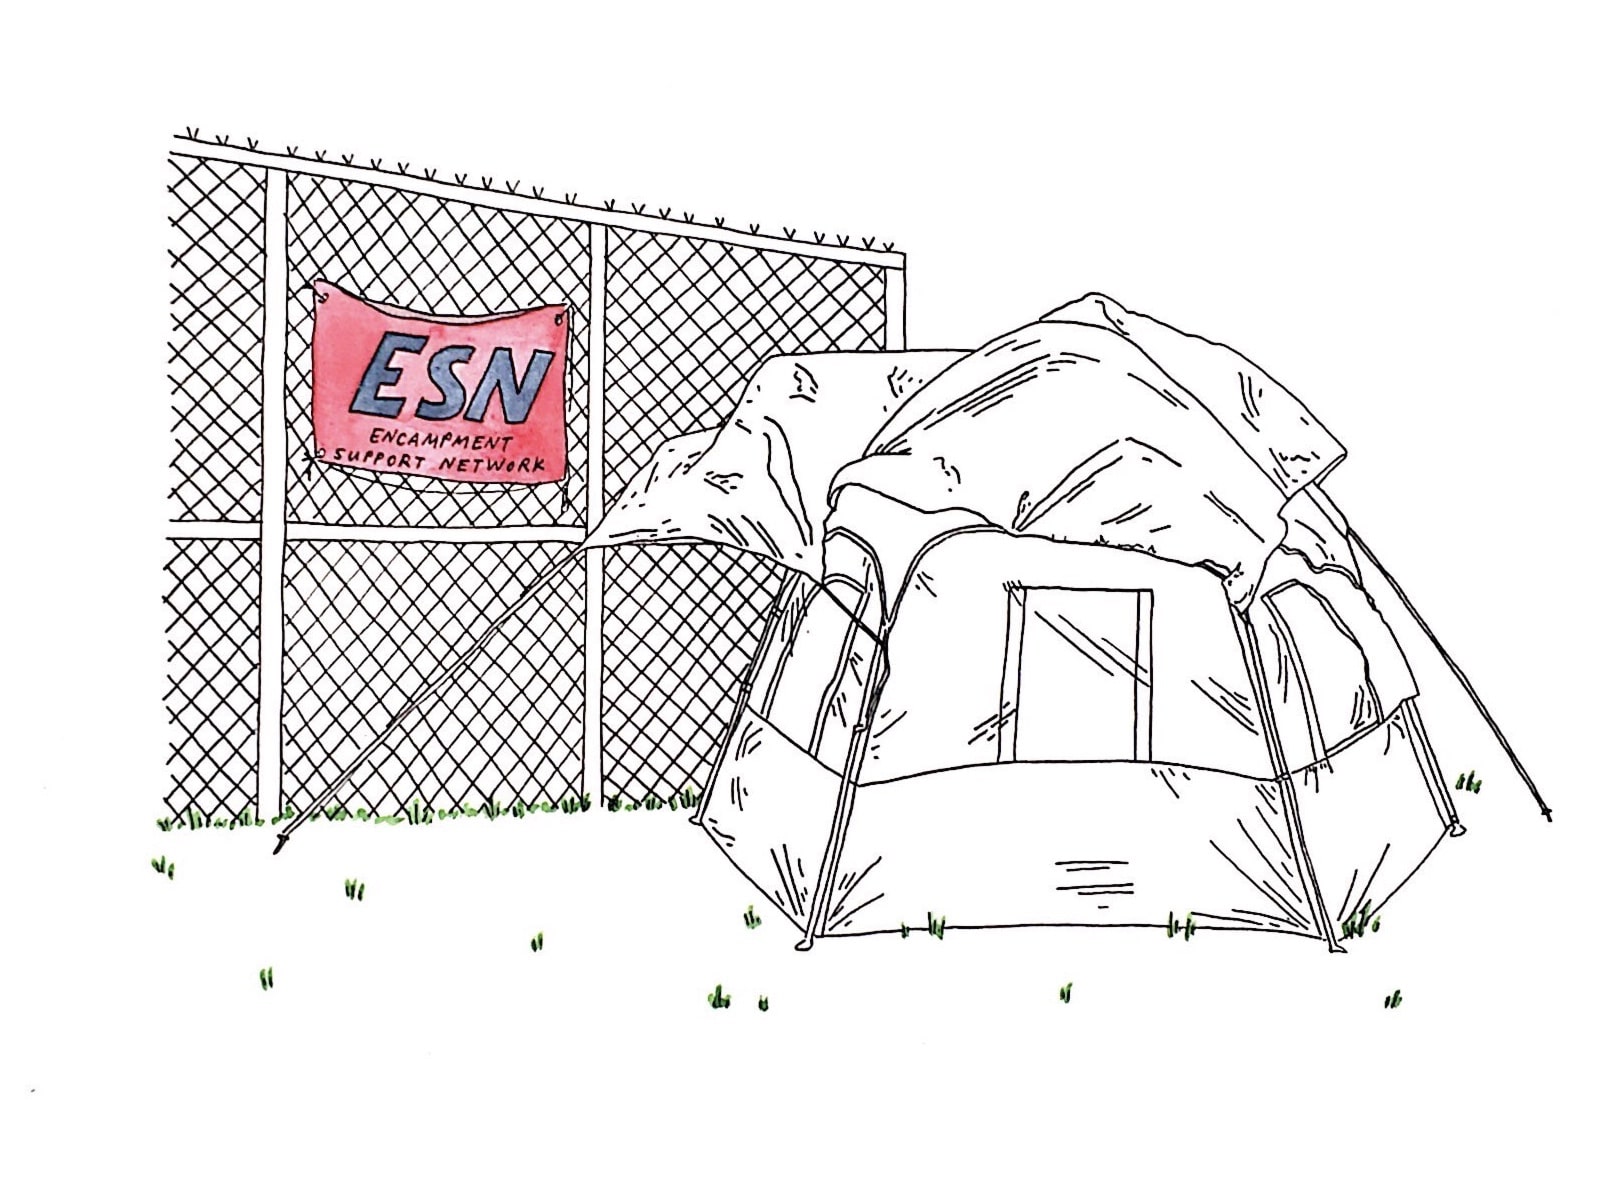 A drawing of a tent next to a chainlink fence with a sign hung on it that reads "ESN: Encampment Support Network"